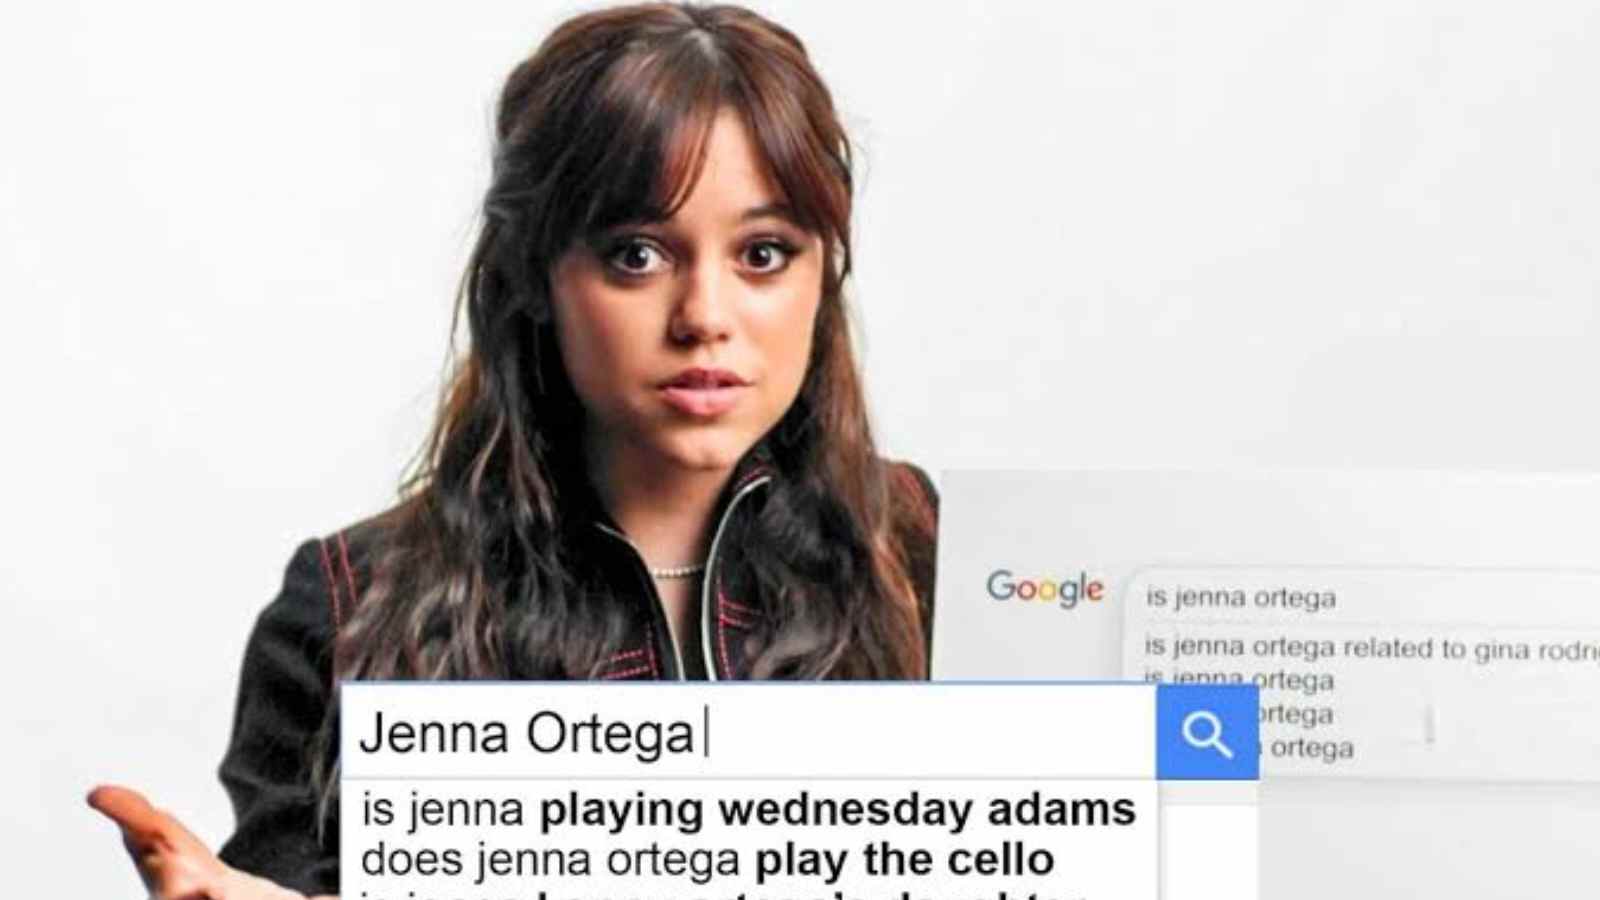 Jenna Ortega during the 'Wired' interview